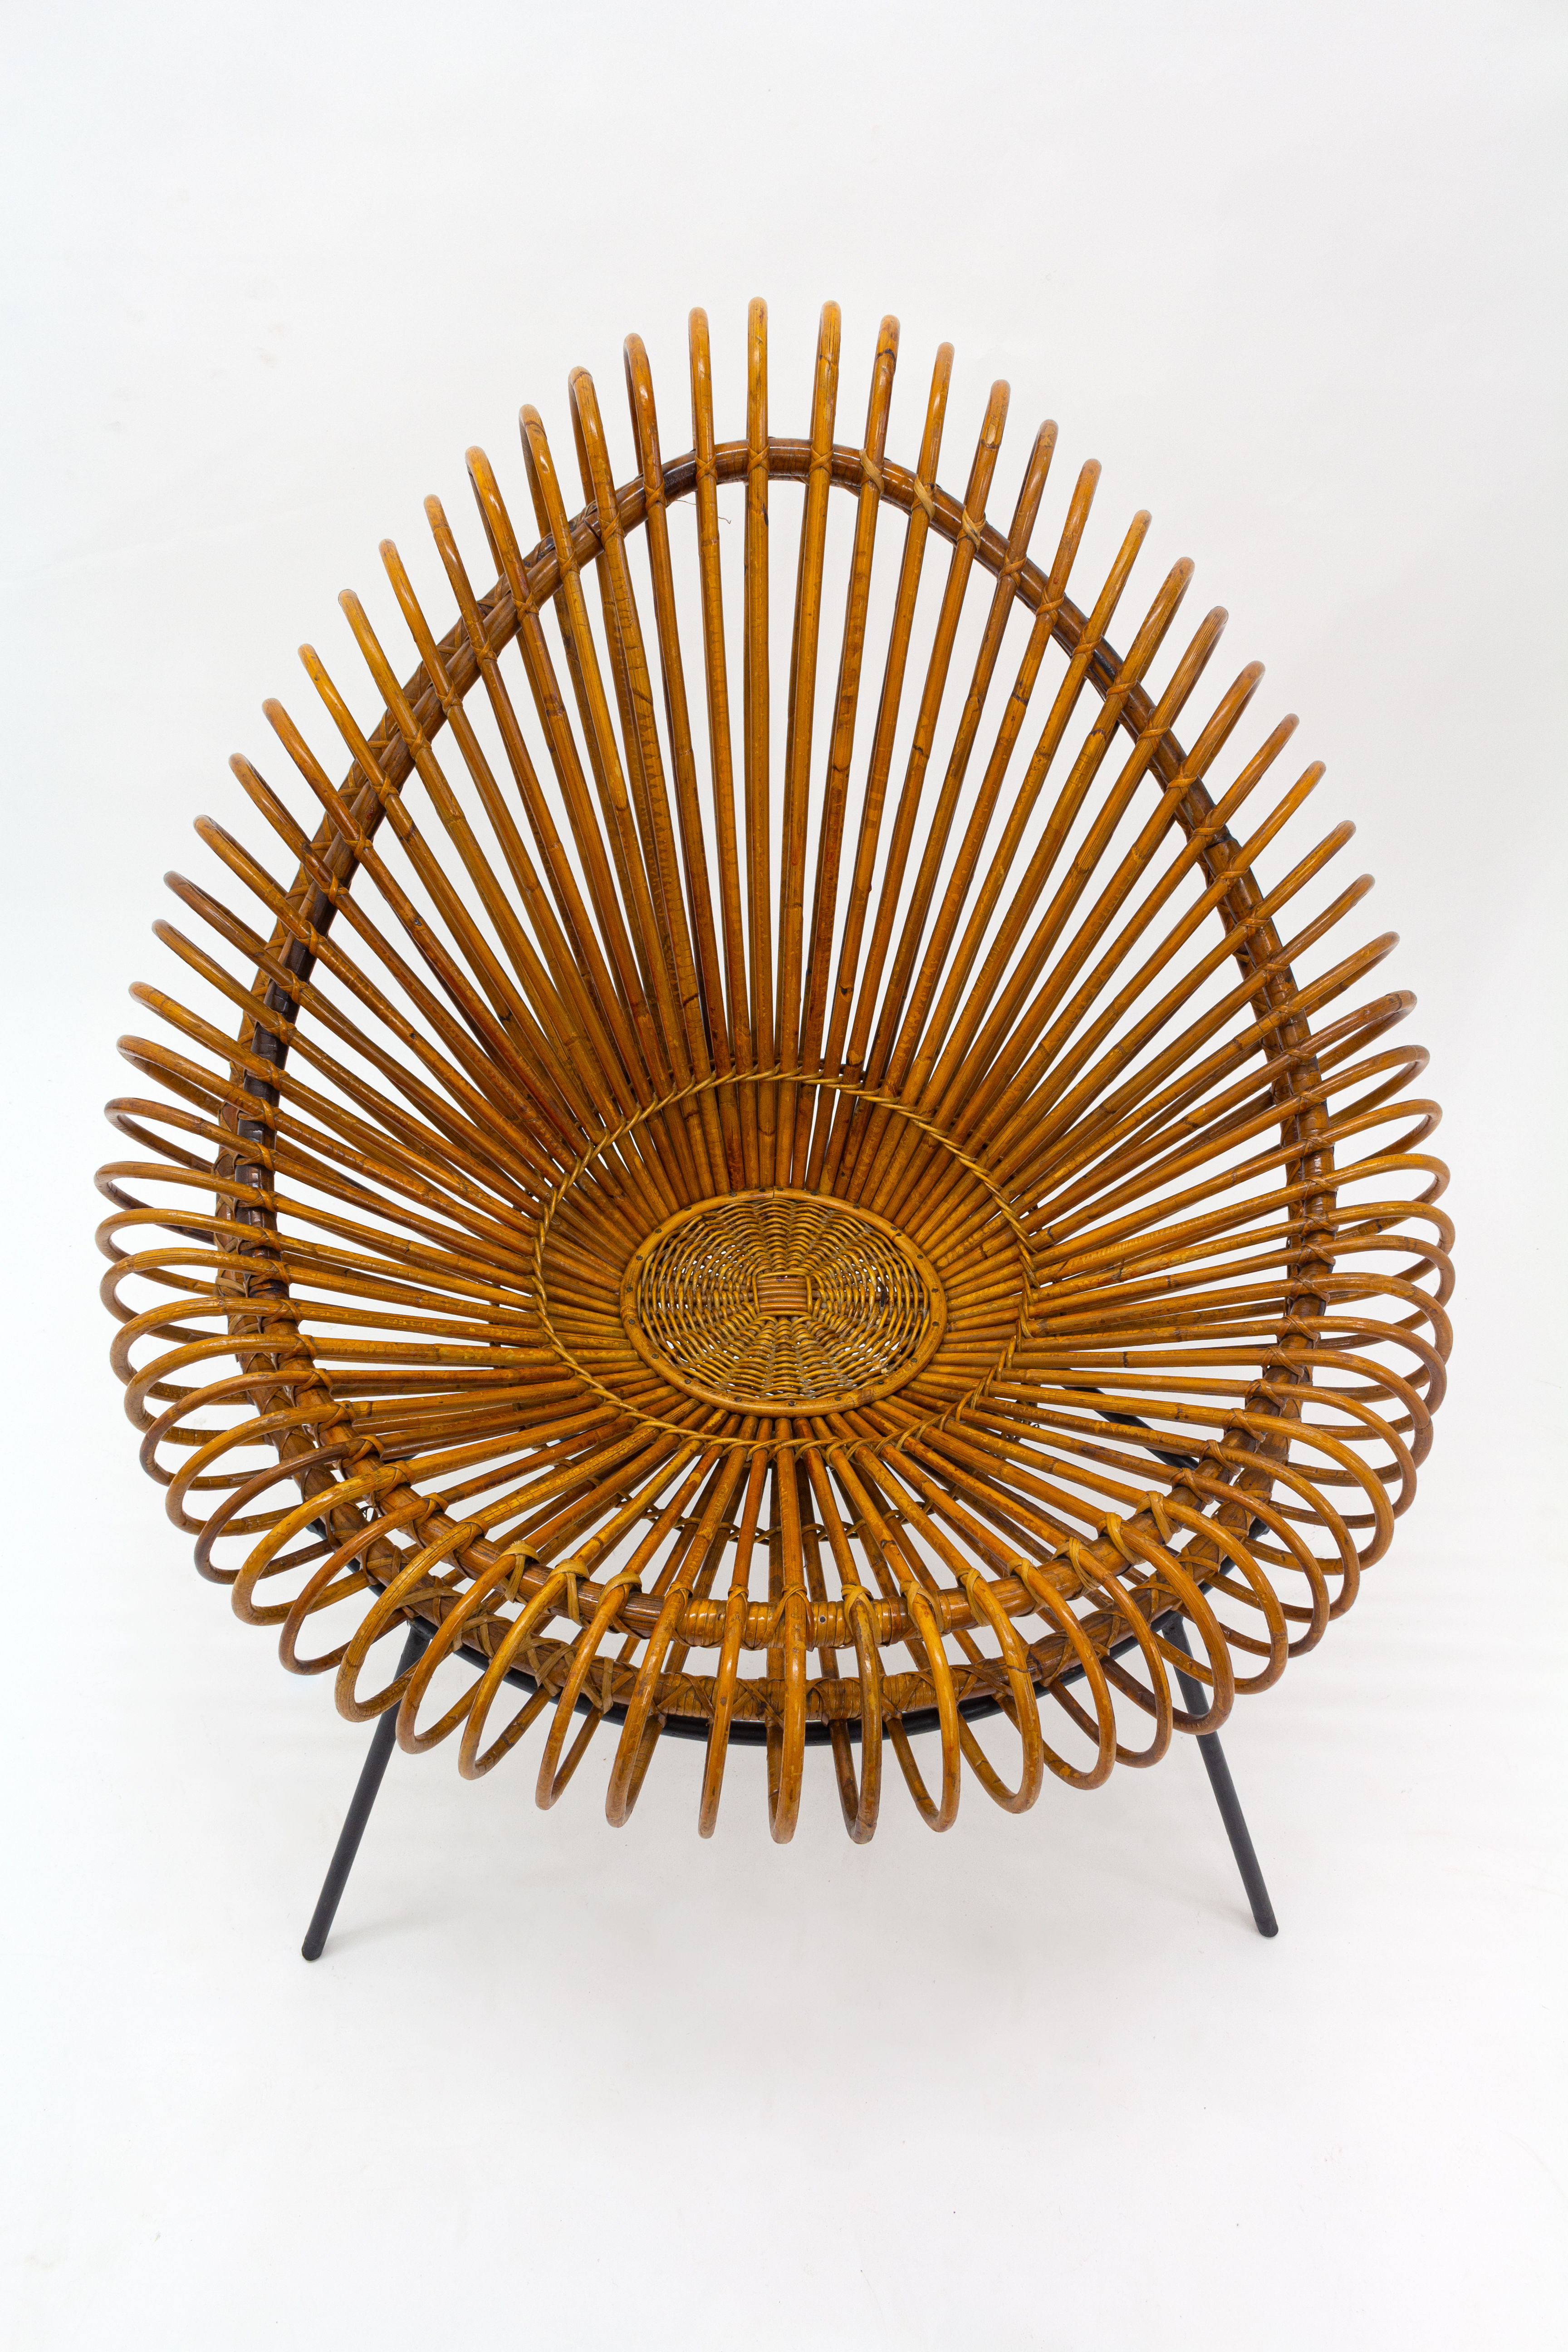 A stylish rattan and iron chair designed by Janine Abraham.